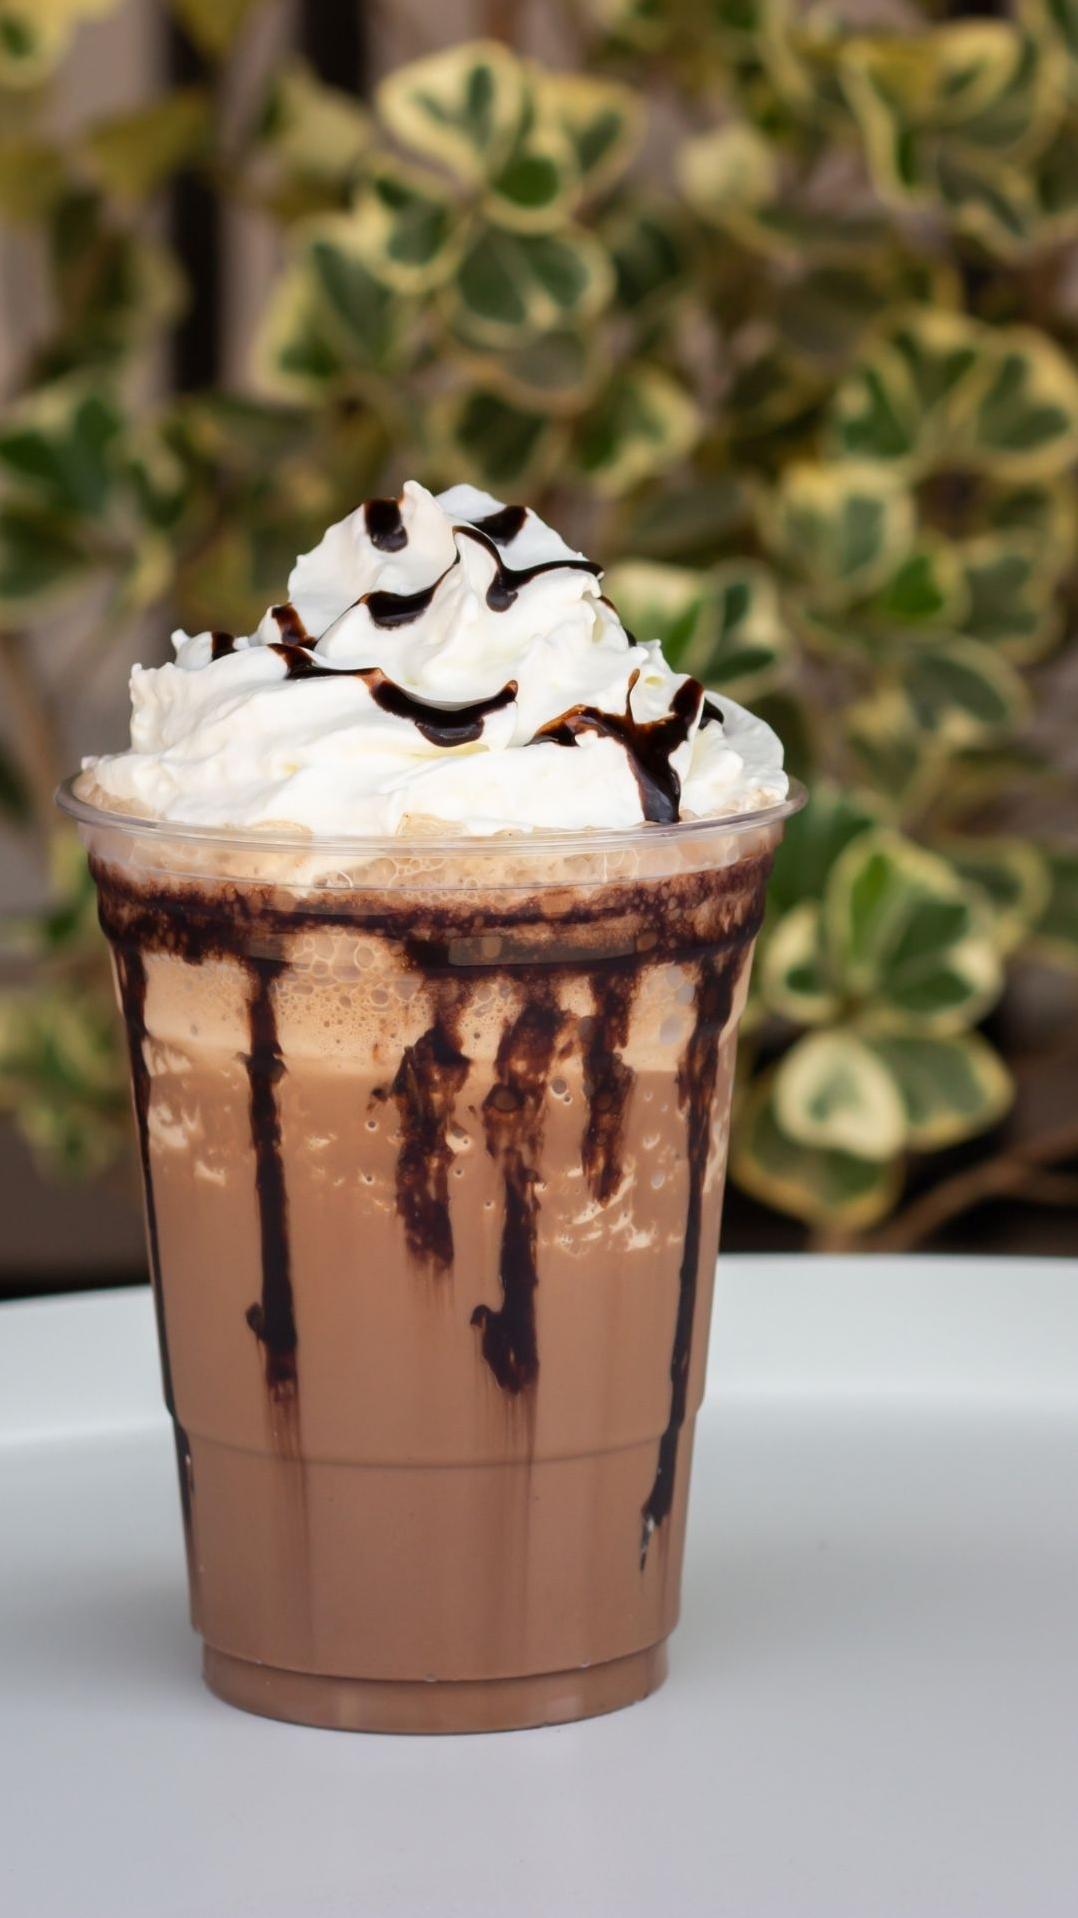  The perfect balance of coffee and chocolate.